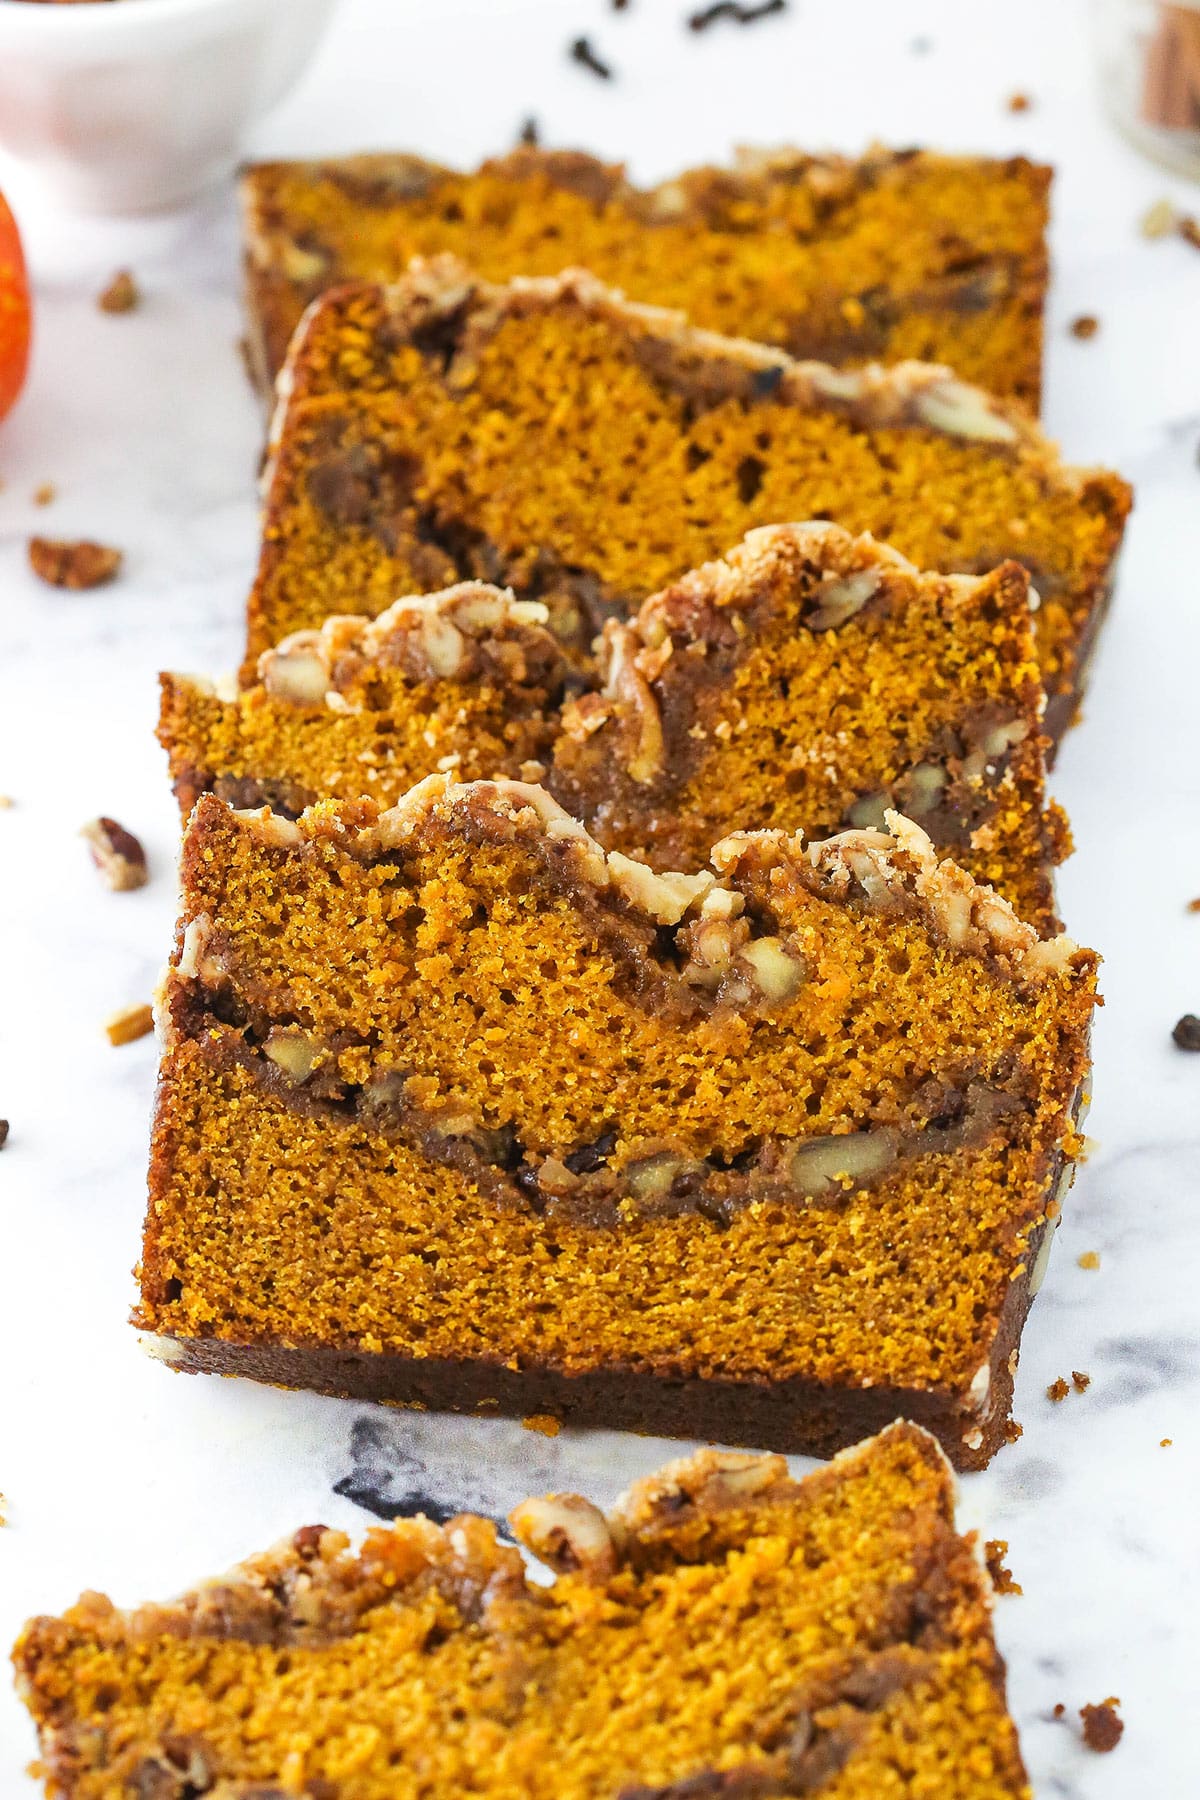 Slices of homemade pumpkin bread lined up on a kitchen countertop